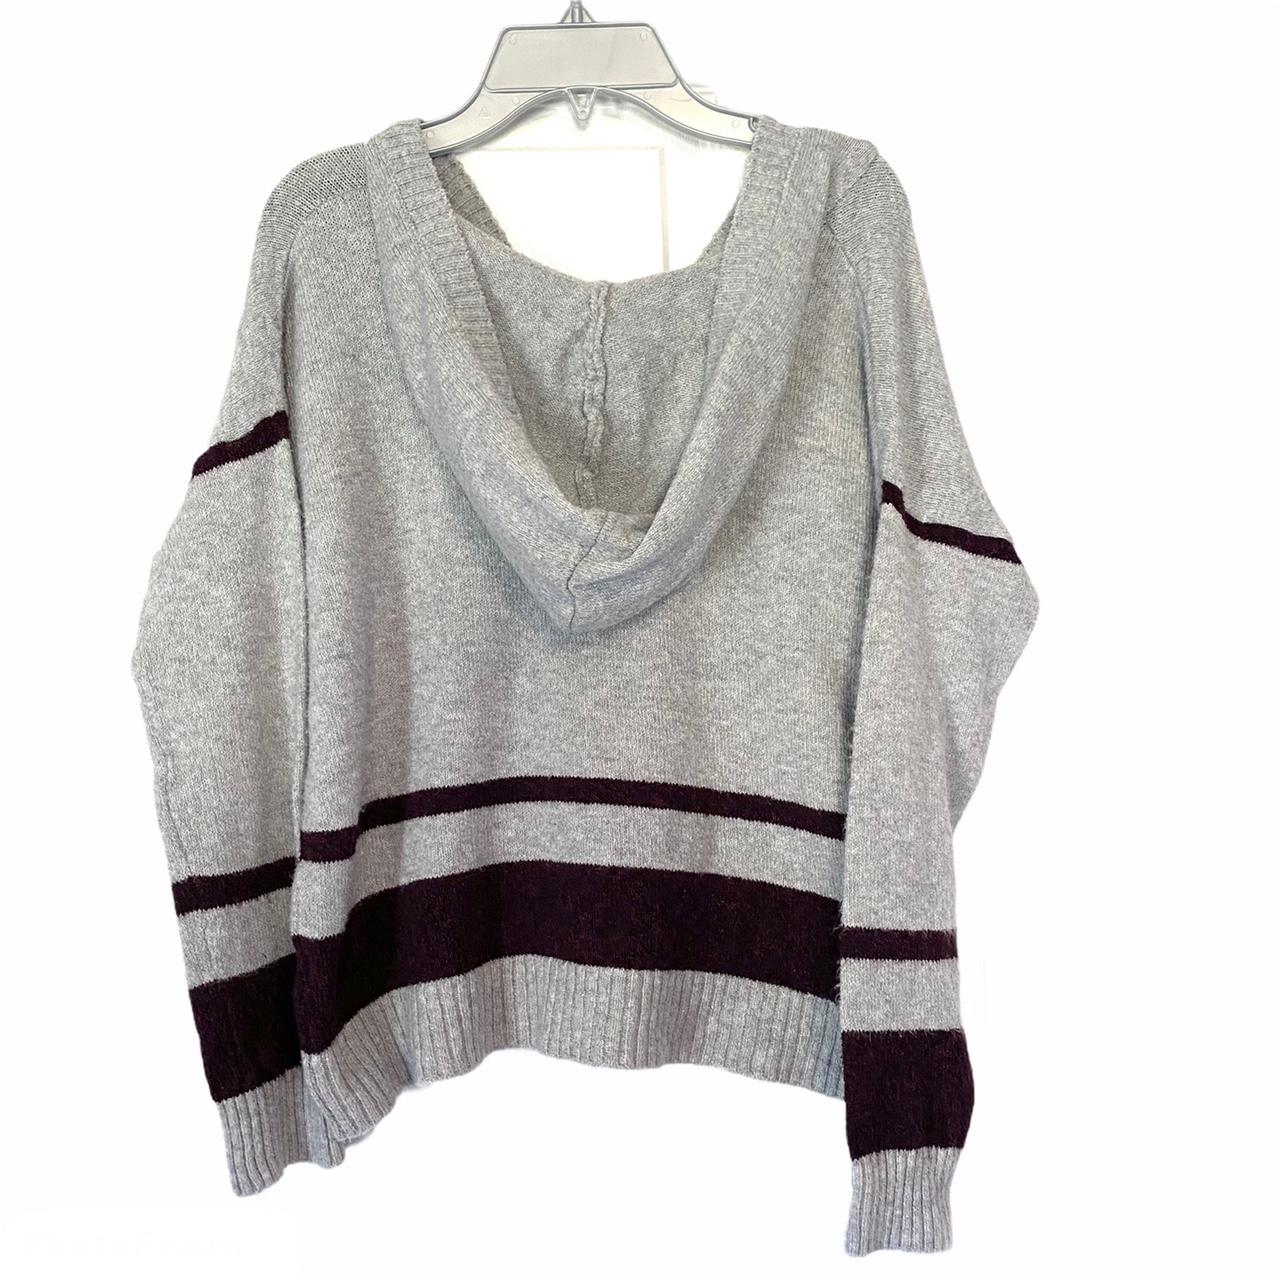 Product Image 3 - This is a sweater from